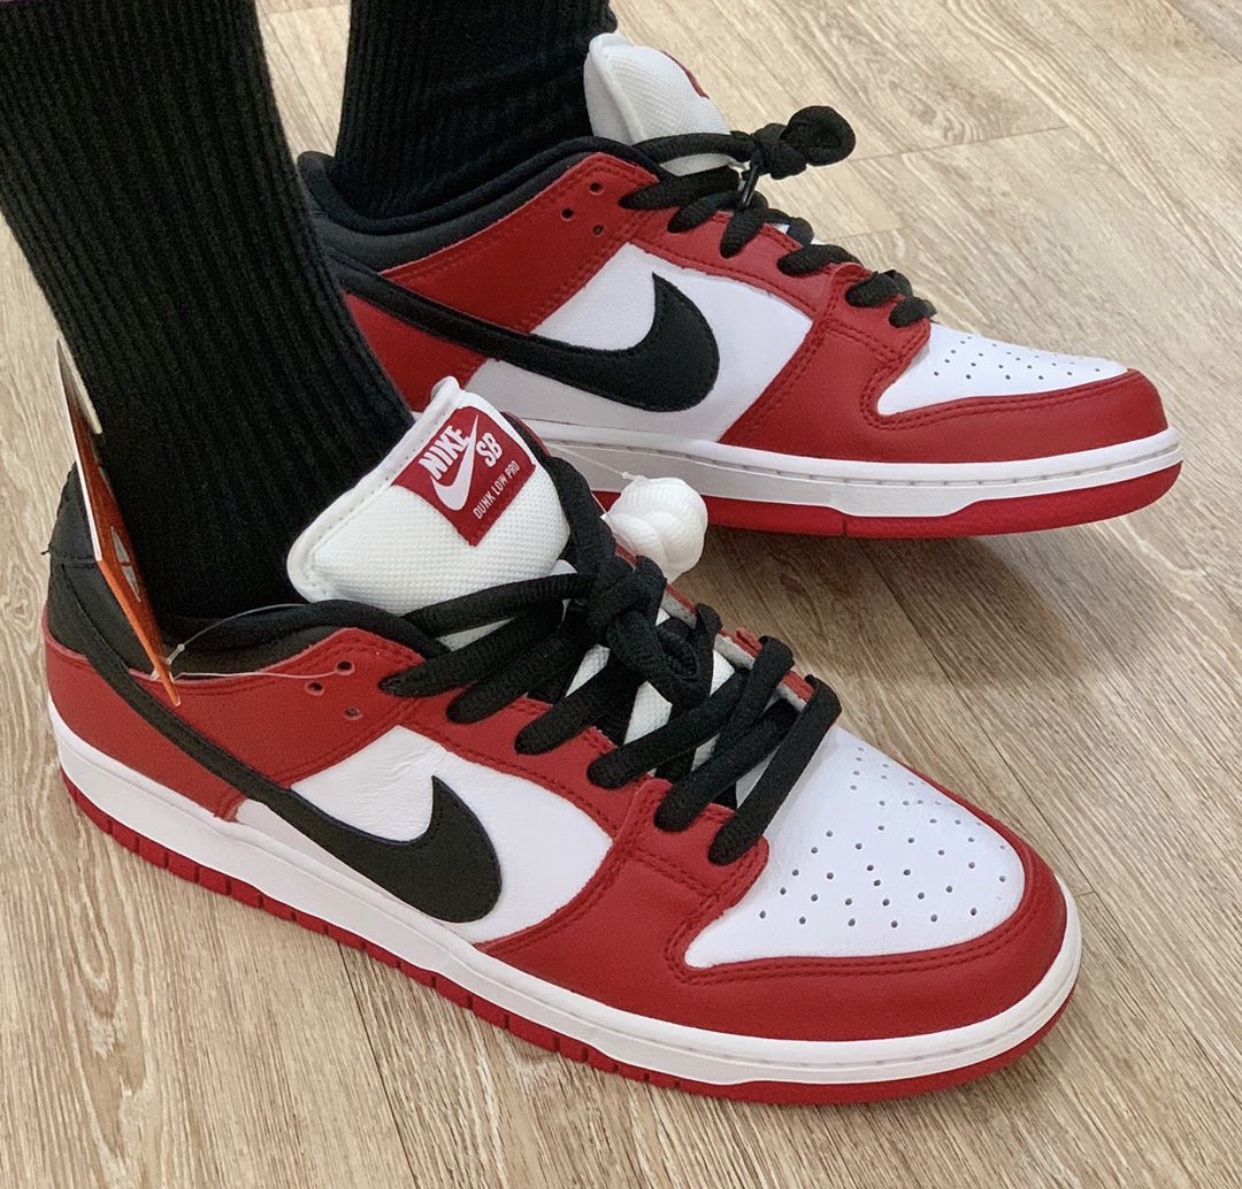 Nike SB Dunk Low Pro “Chicago” - SNKRS WORLD